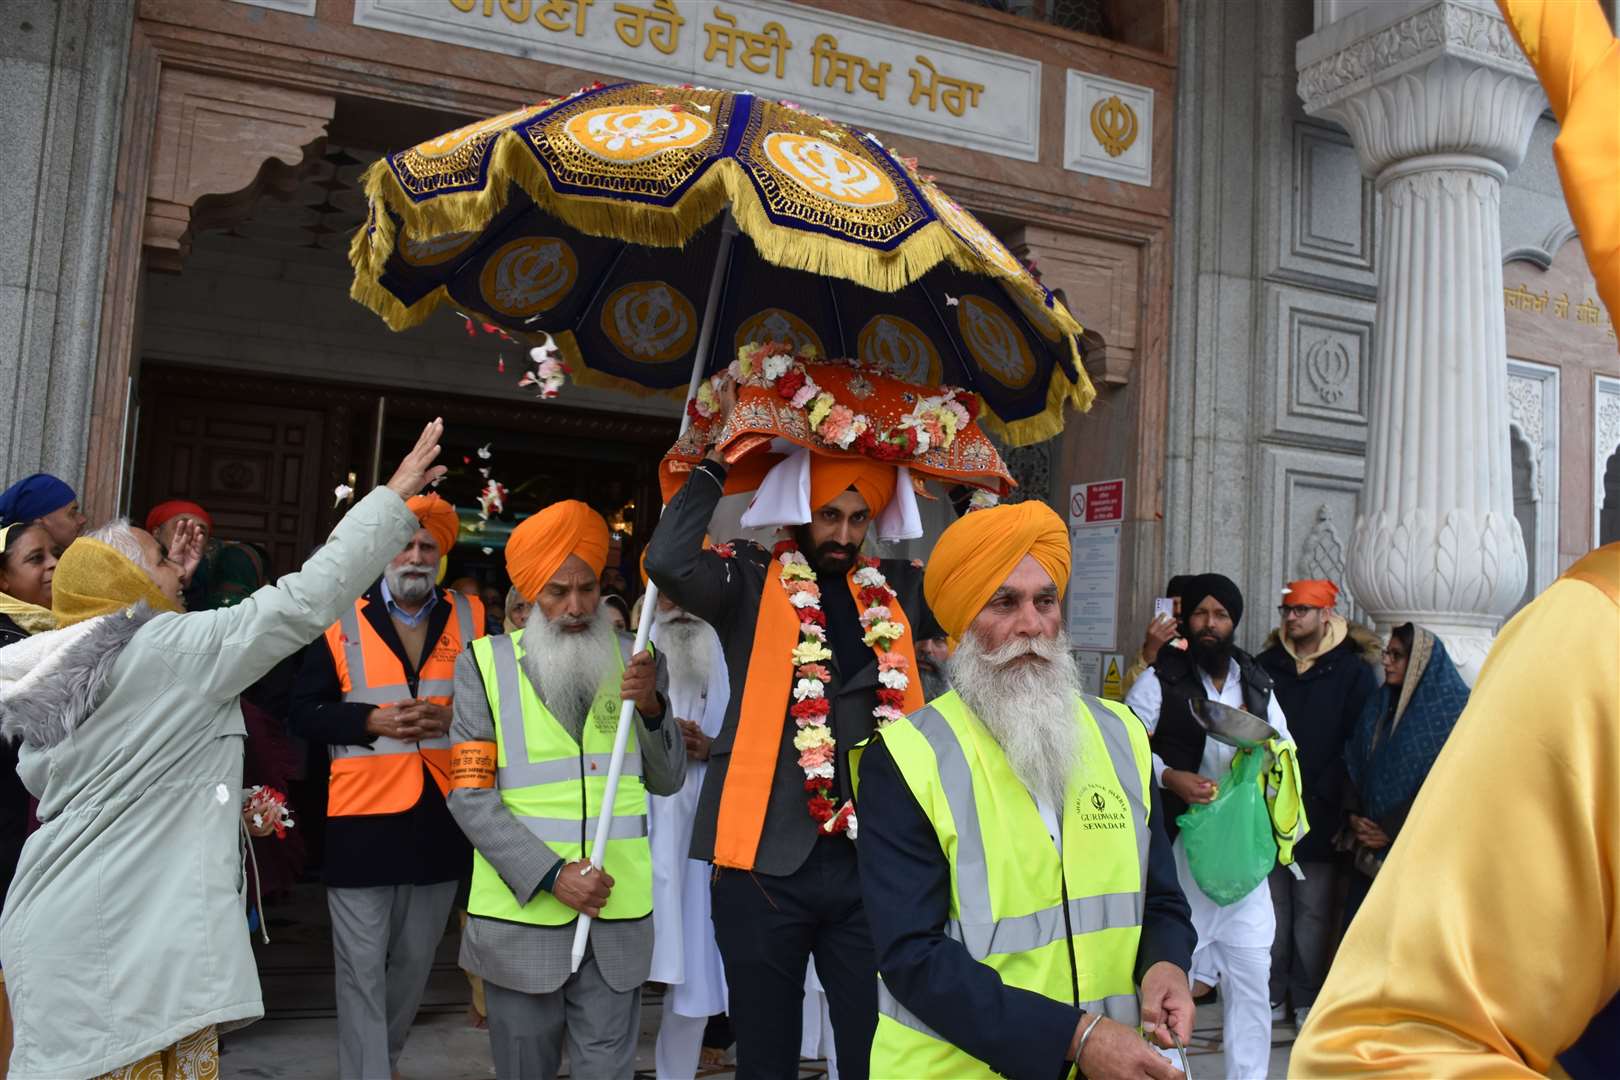 The festival looped around to the Gurdwara in Gravesend. Picture: Jason Arthur